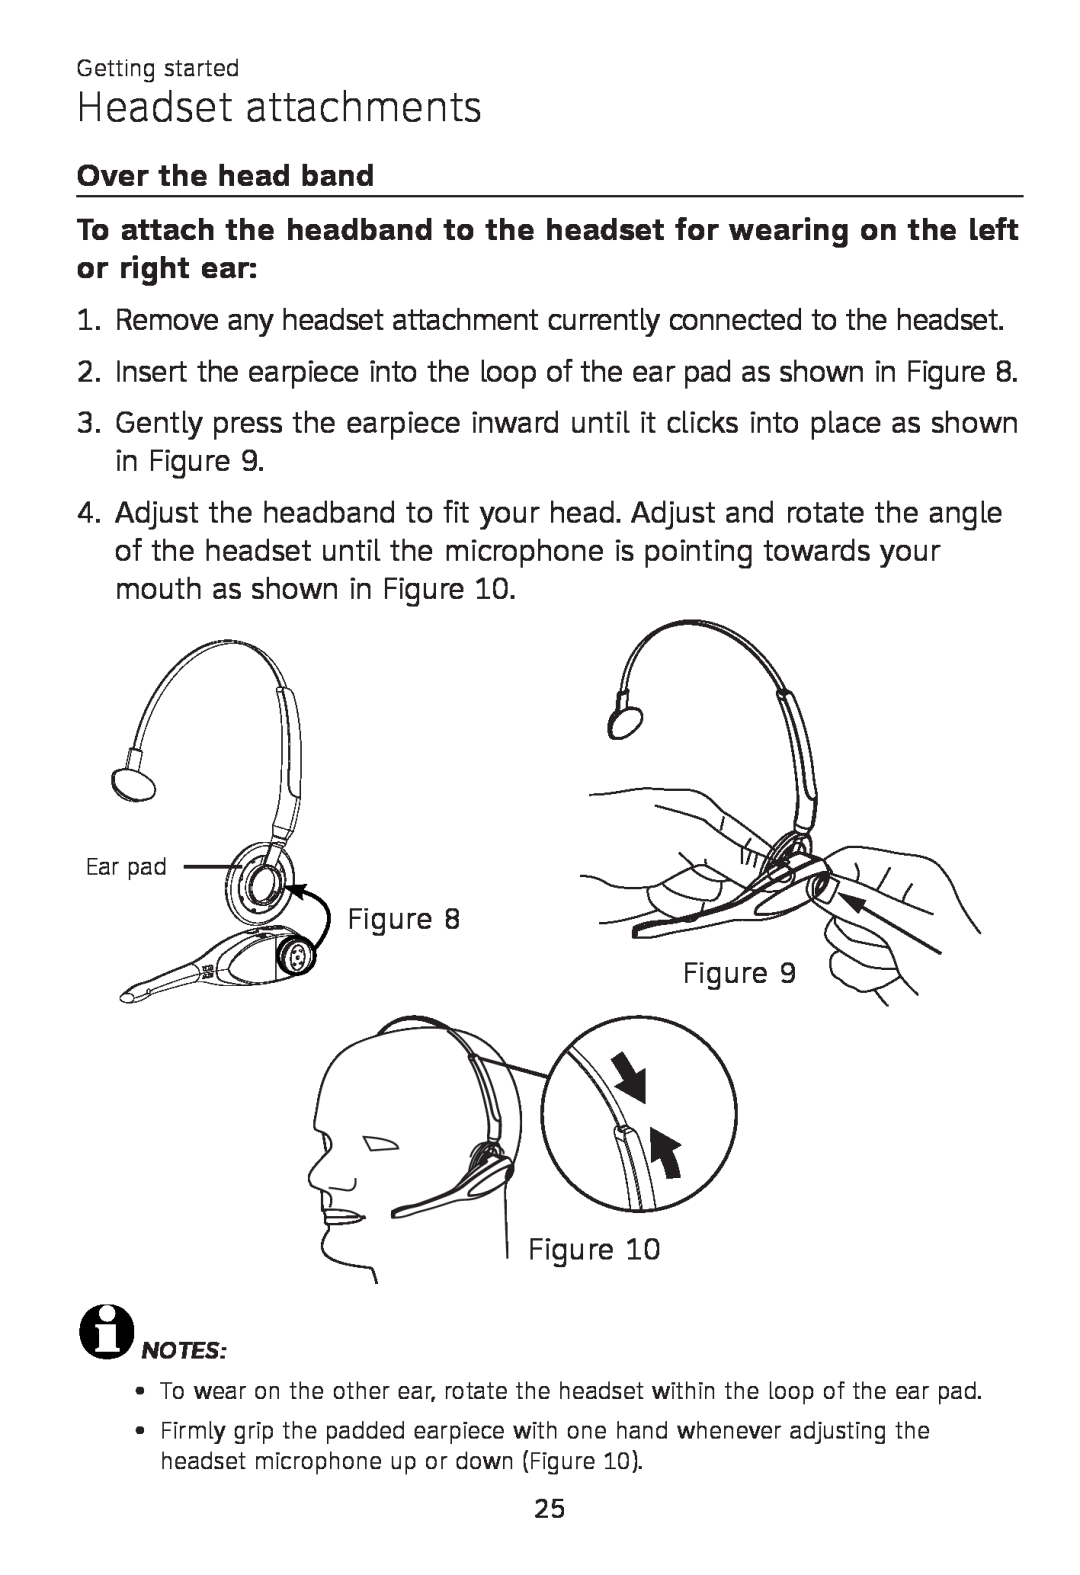 AT&T TL 7610 user manual Over the head band, Headset attachments 